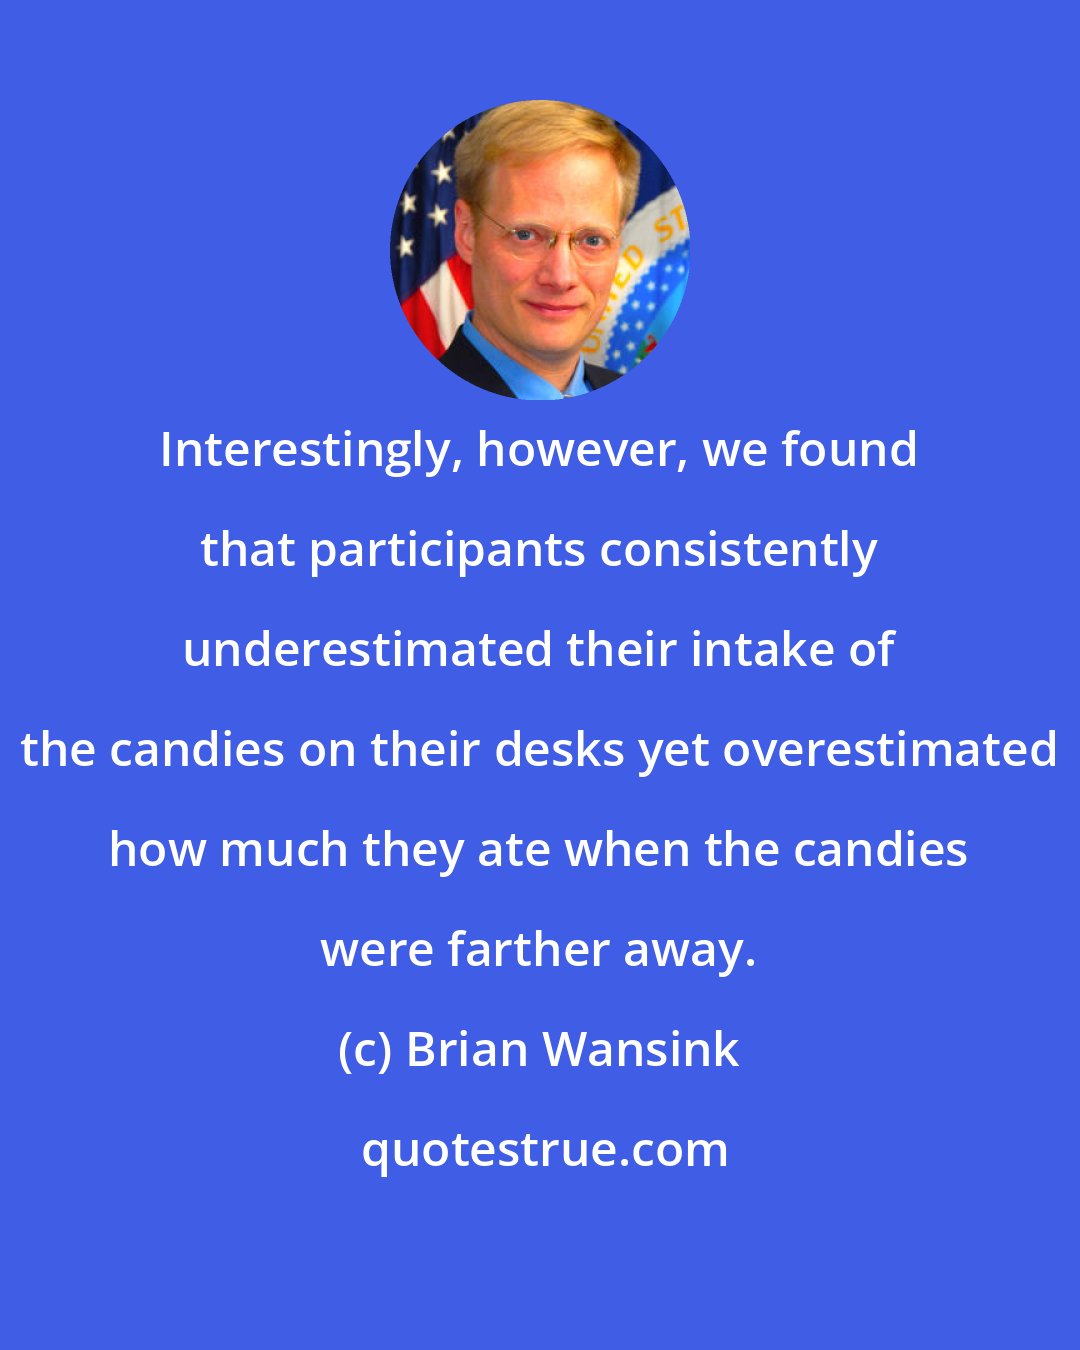 Brian Wansink: Interestingly, however, we found that participants consistently underestimated their intake of the candies on their desks yet overestimated how much they ate when the candies were farther away.